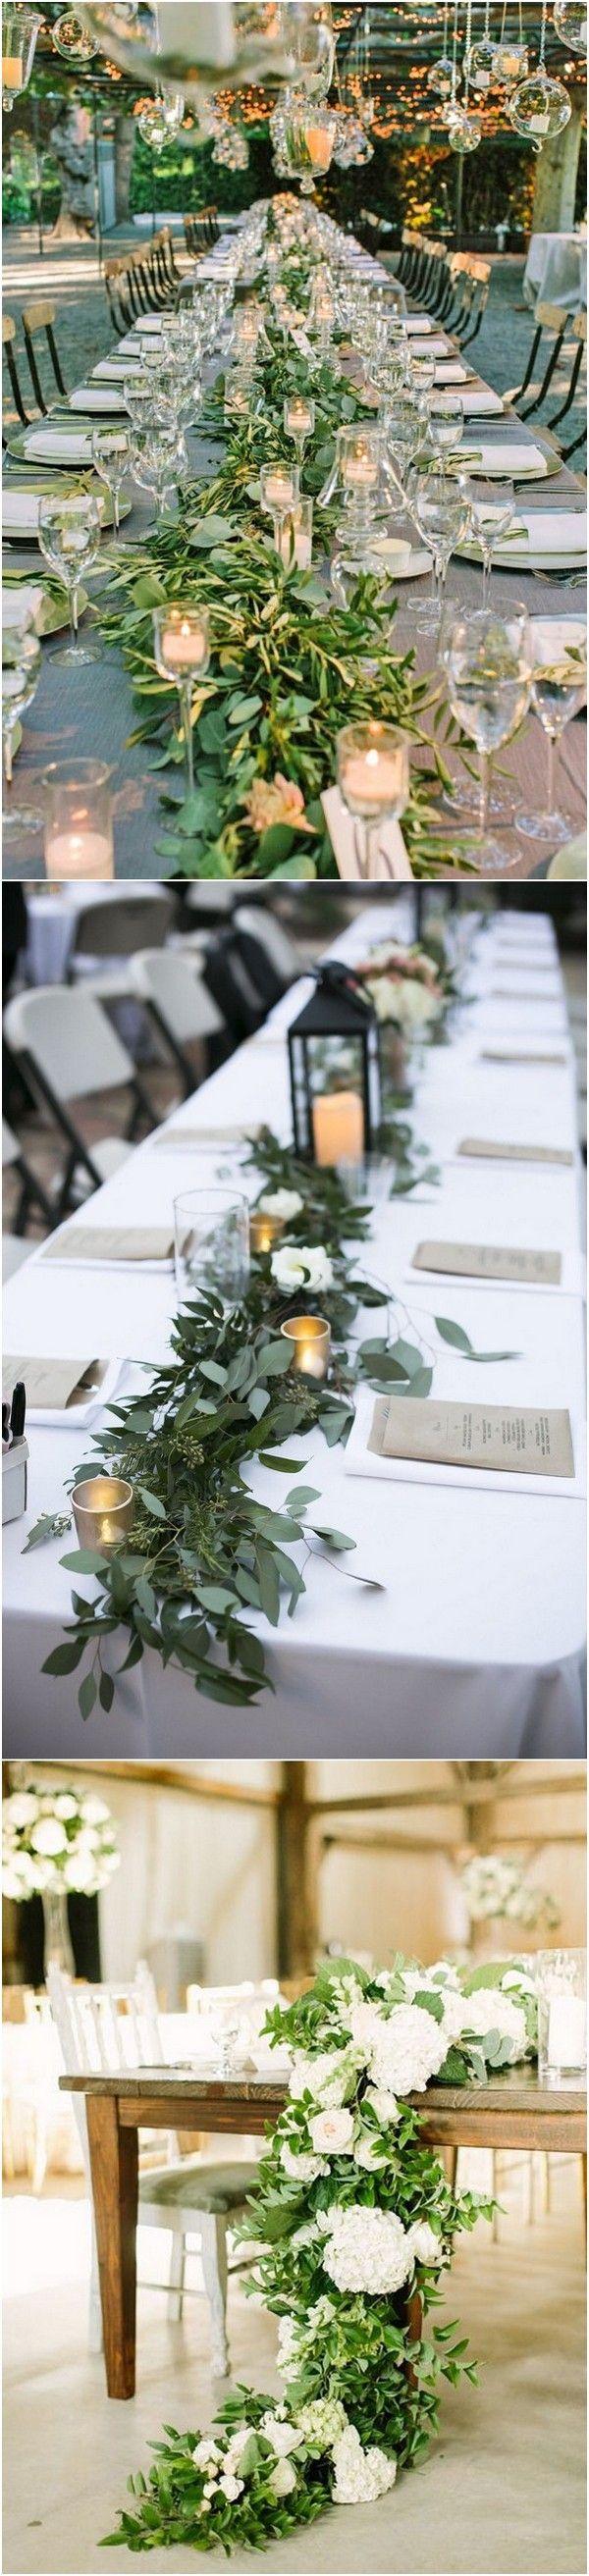 Wedding - Trending-20 Chic White And Green Wedding Centerpiece Ideas - Page 3 Of 3